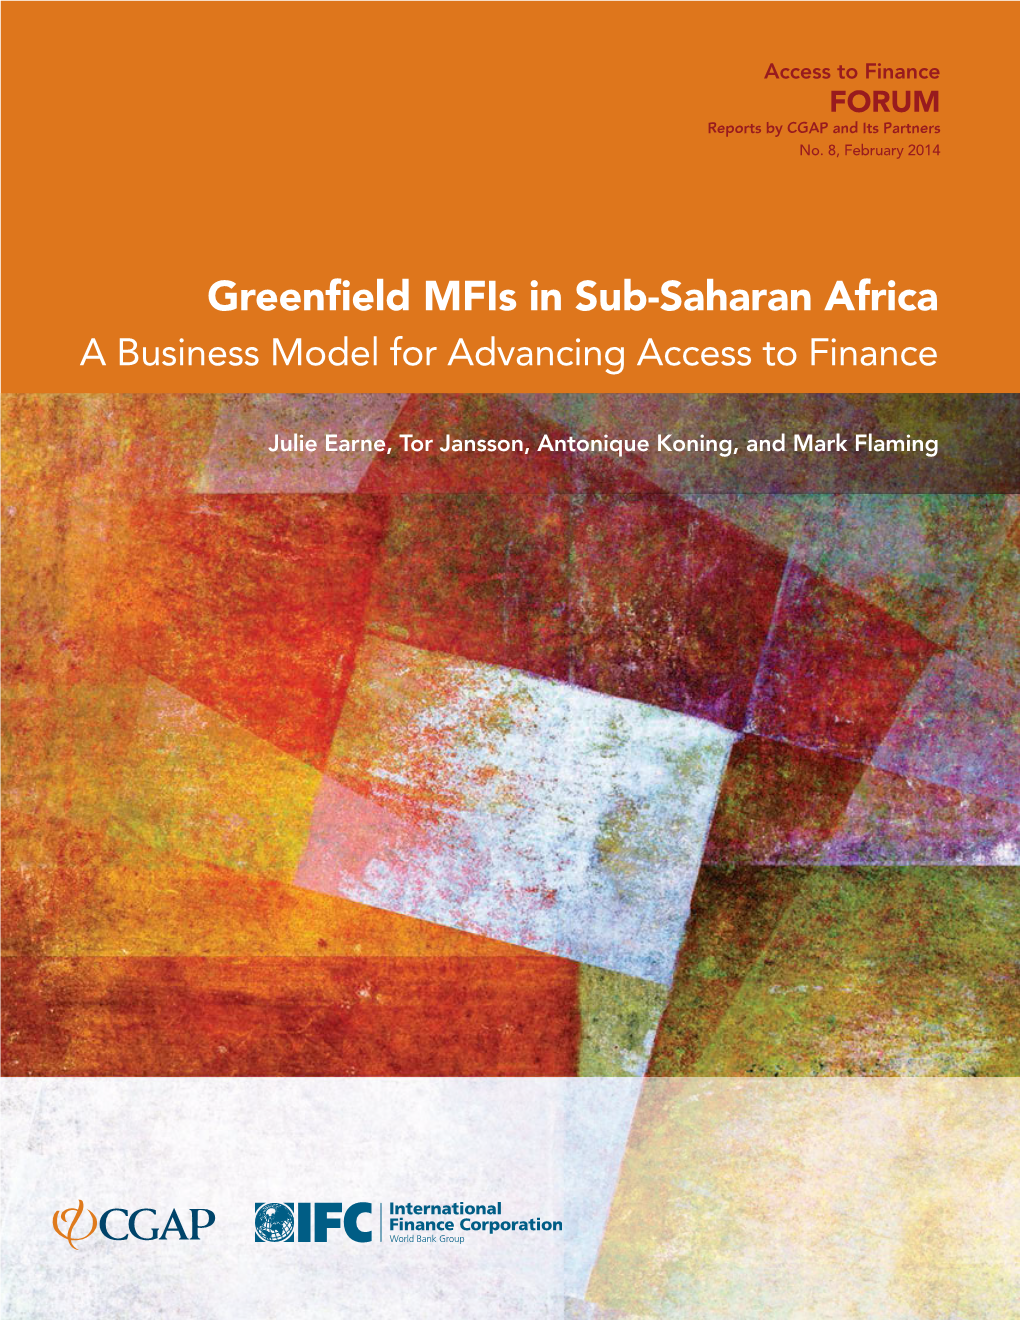 Greenfield Mfis in Sub-Saharan Africa a Business Model for Advancing Access to Finance